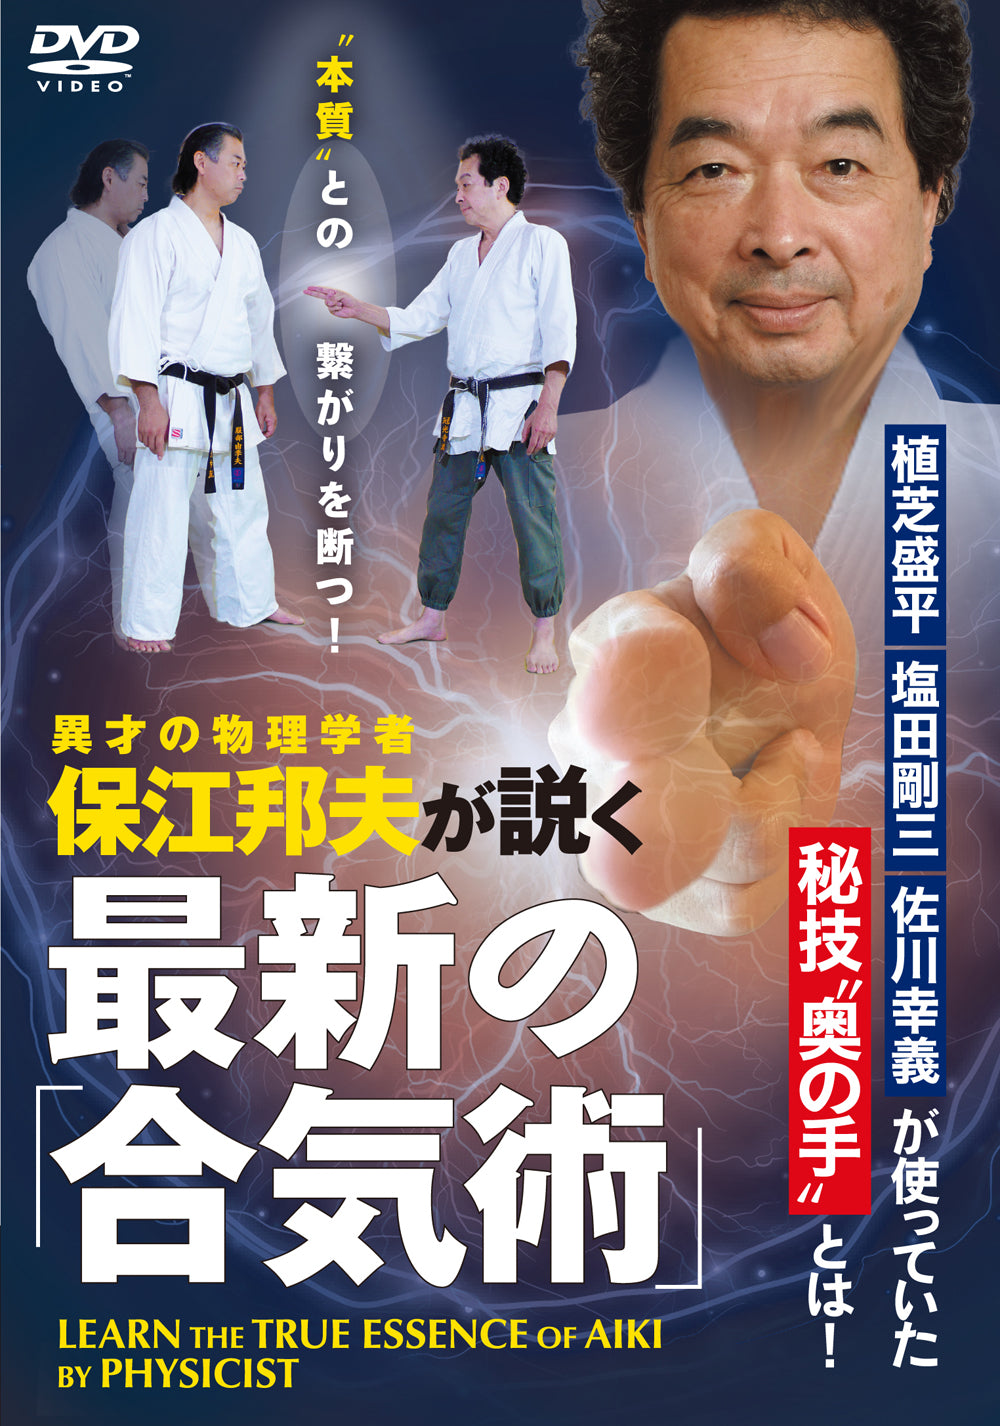 Learn the True Essence of Aiki by a Physicist DVD by Kunio Yasue